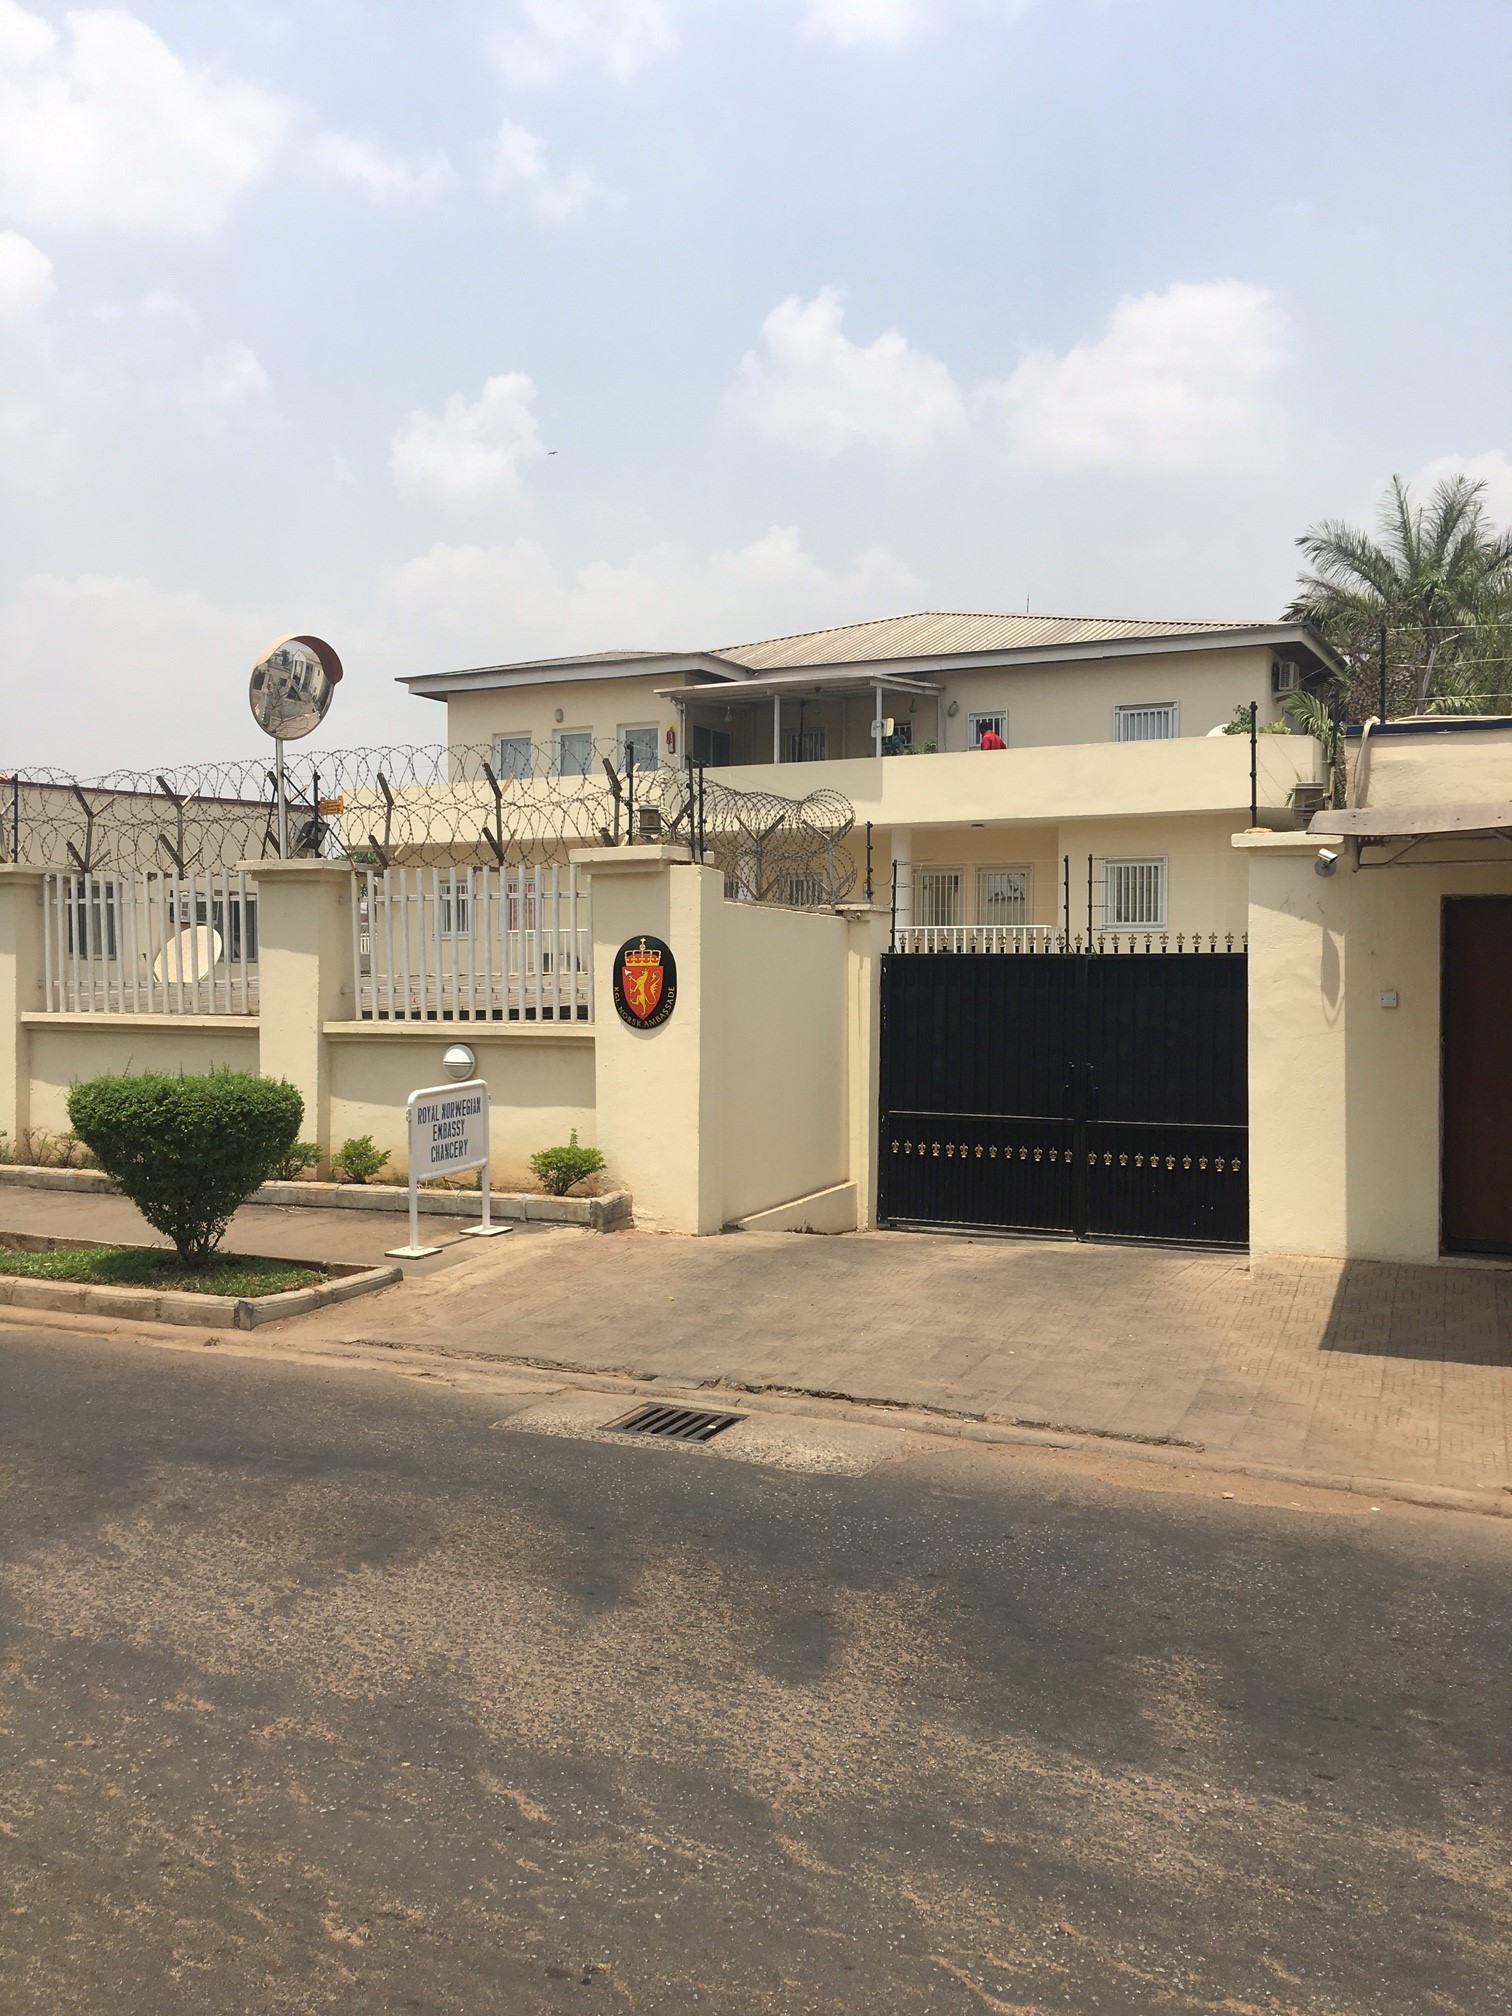 About the Embassy - Norway in Nigeria